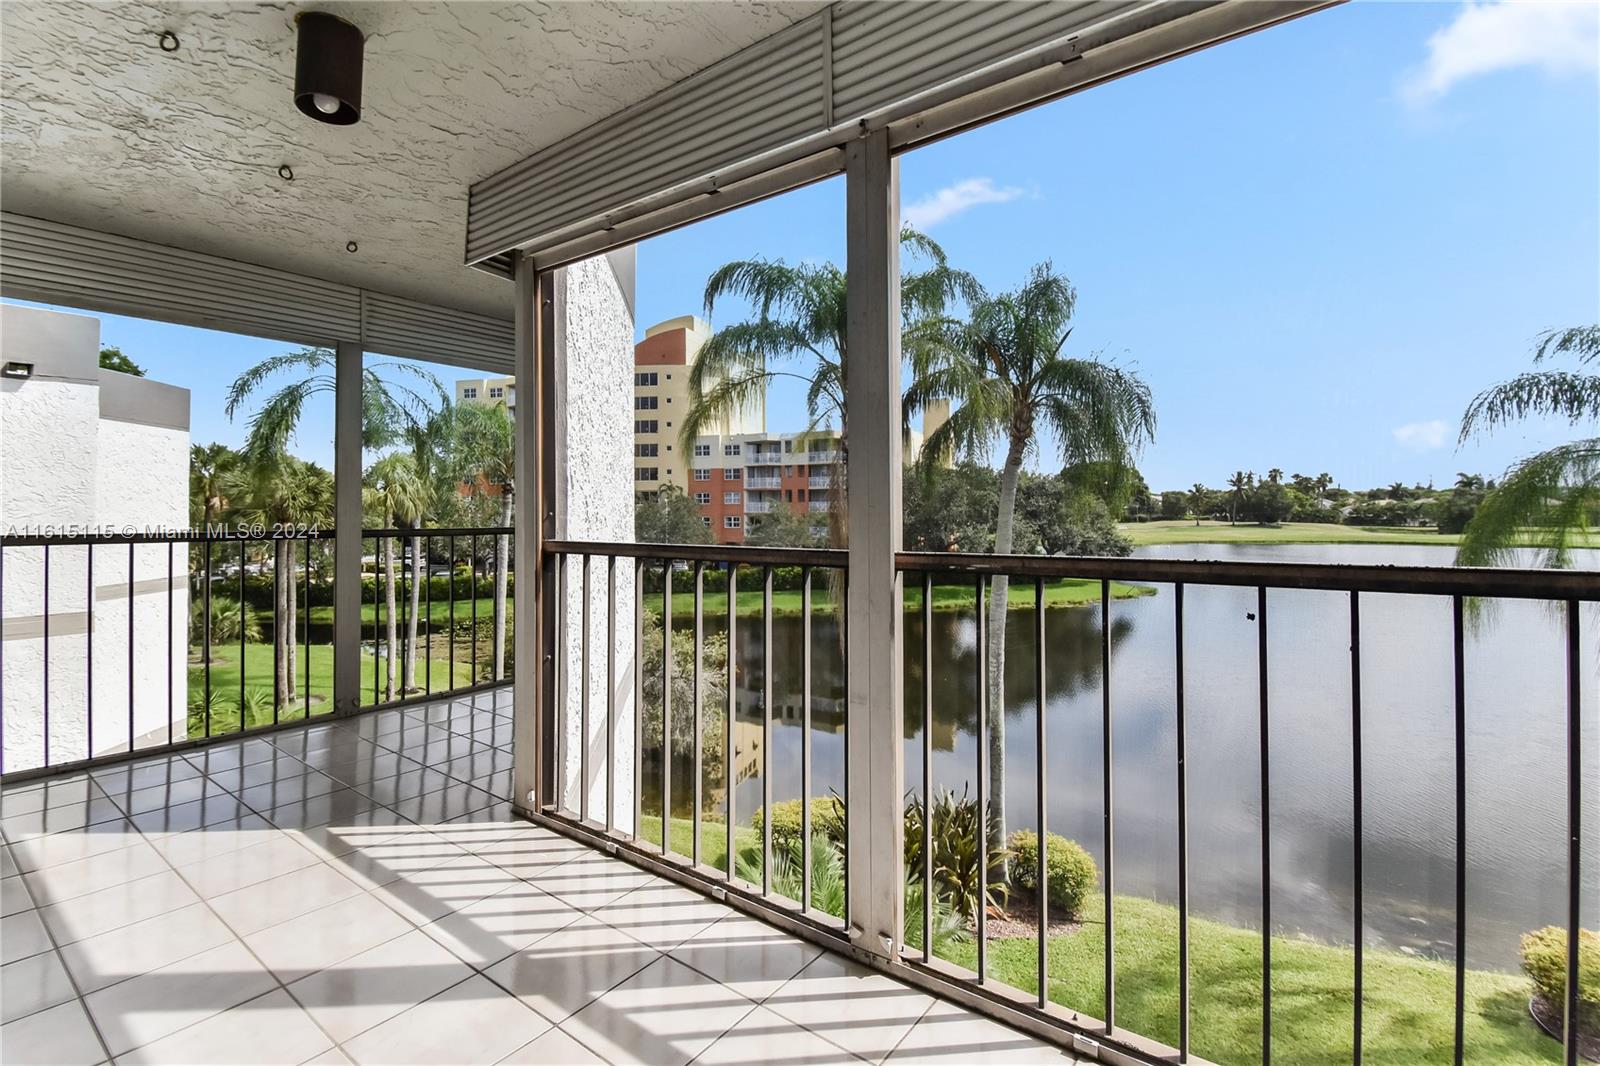 Stunning lake view condo featuring 2 bedrooms and 2.5 baths in the highly desirable city of Weston. This updated unit boasts a split bedroom floor plan for added privacy, with each bedroom having its own bathroom. Enjoy the convenience of a full-size washer and dryer in the unit. The community offers amenities such as a pool and tennis courts just steps away from the building. Included is a mandatory membership to the Bonaventure Town Center Club at $360/year, granting access to lifestyle classes, a fitness center, business center, kids camps, indoor bowling, basketball, tennis, pickleball, two pools, and more. Located in an area with A+ schools and easy access to major highways, it’s just 20 minutes from beaches and airports.